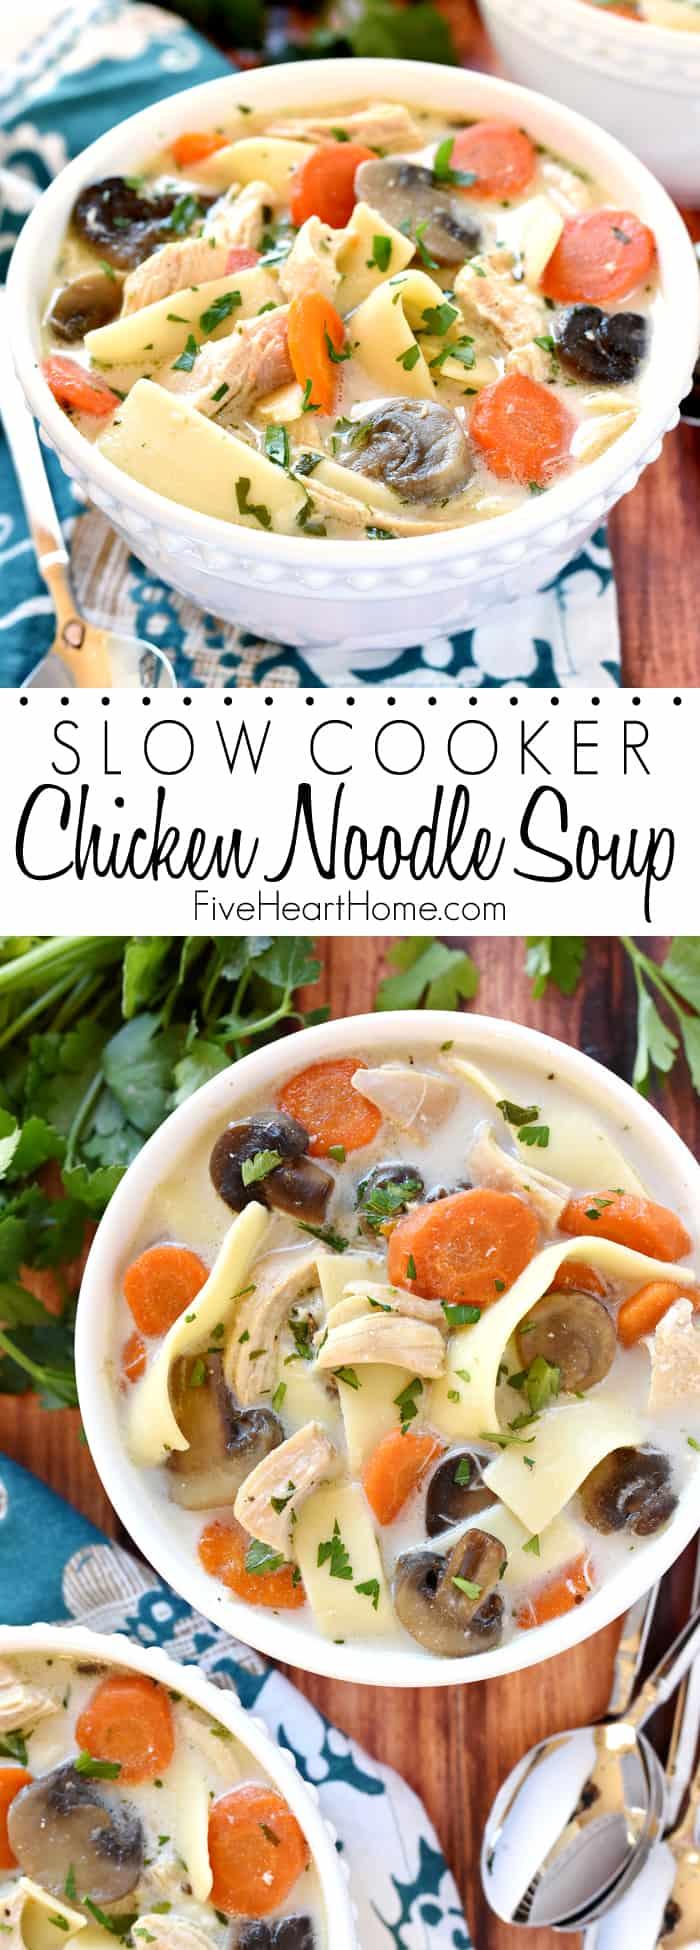 The BEST Slow Cooker Chicken Noodle Soup ~ wholesome and easy to make, this crock pot soup is extra flavorful thanks to a few secret ingredients...and it's the perfect get-well-soon recipe for making it through cold and flu season! | FiveHeartHome.com via @fivehearthome